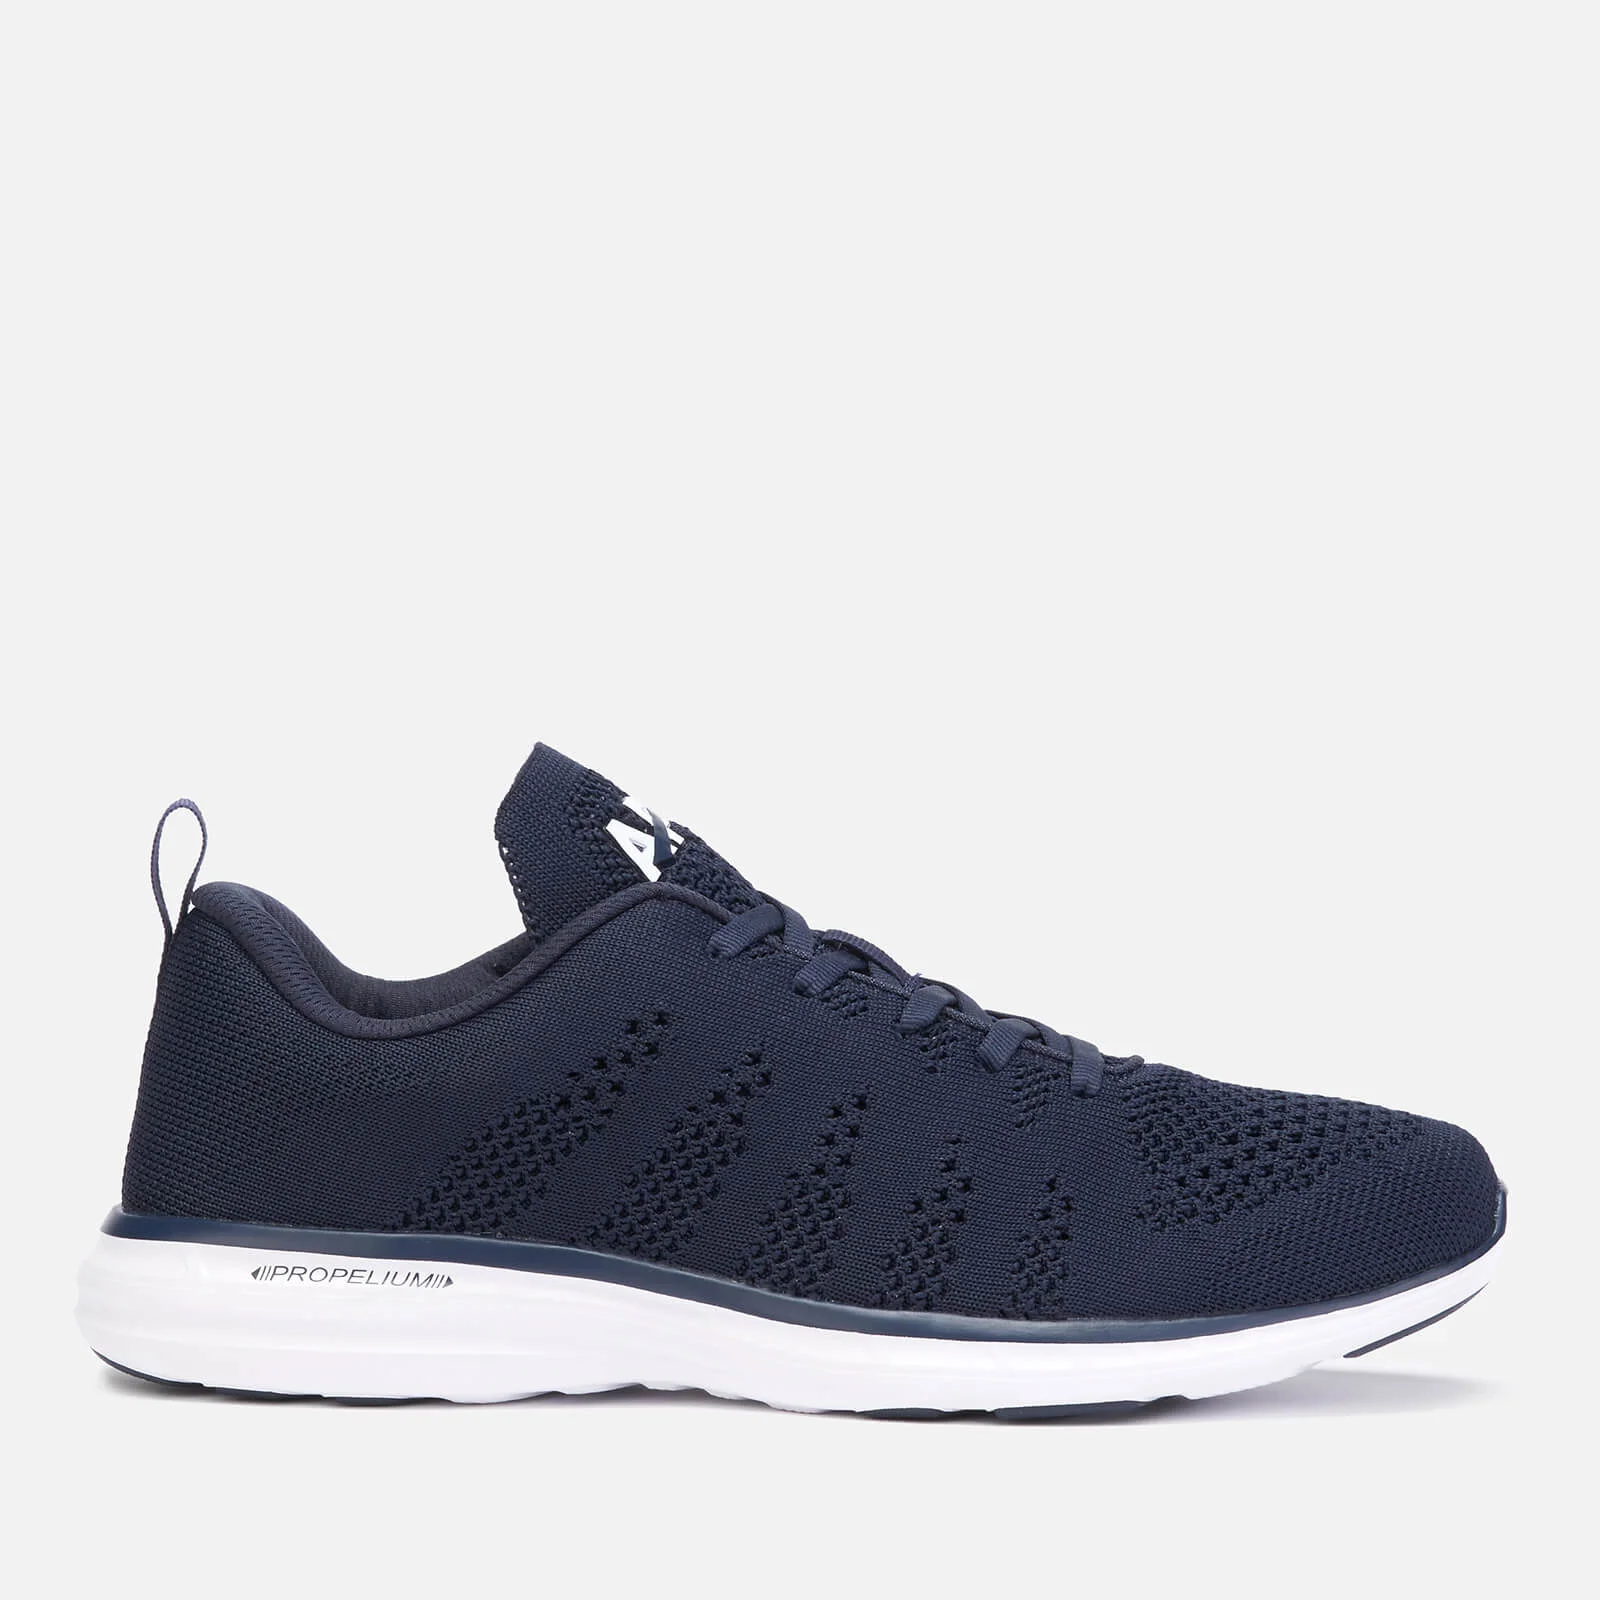 Athletic Propulsion Labs Men's Techloom Pro Trainers - Midnight/White Image 1